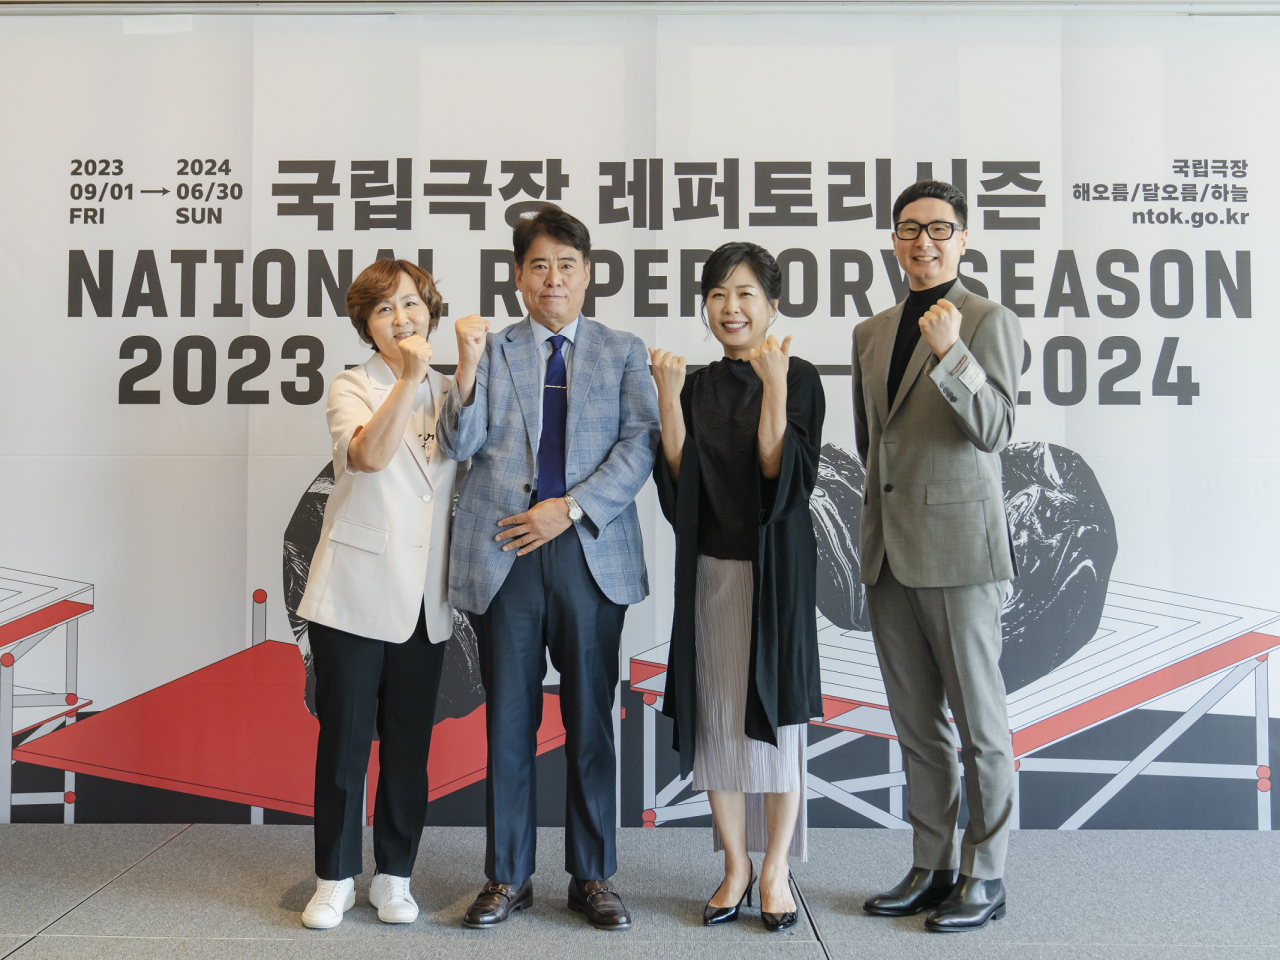 From left: Artistic director Yu Eun-seon, National Theater of Korea CEO Park In-gun and artistic directors Yeo Mi-sun and Kim Jong-deok pose for a group photo during a press conference in Jung-gu, Seoul, Thursday. (NTOK)